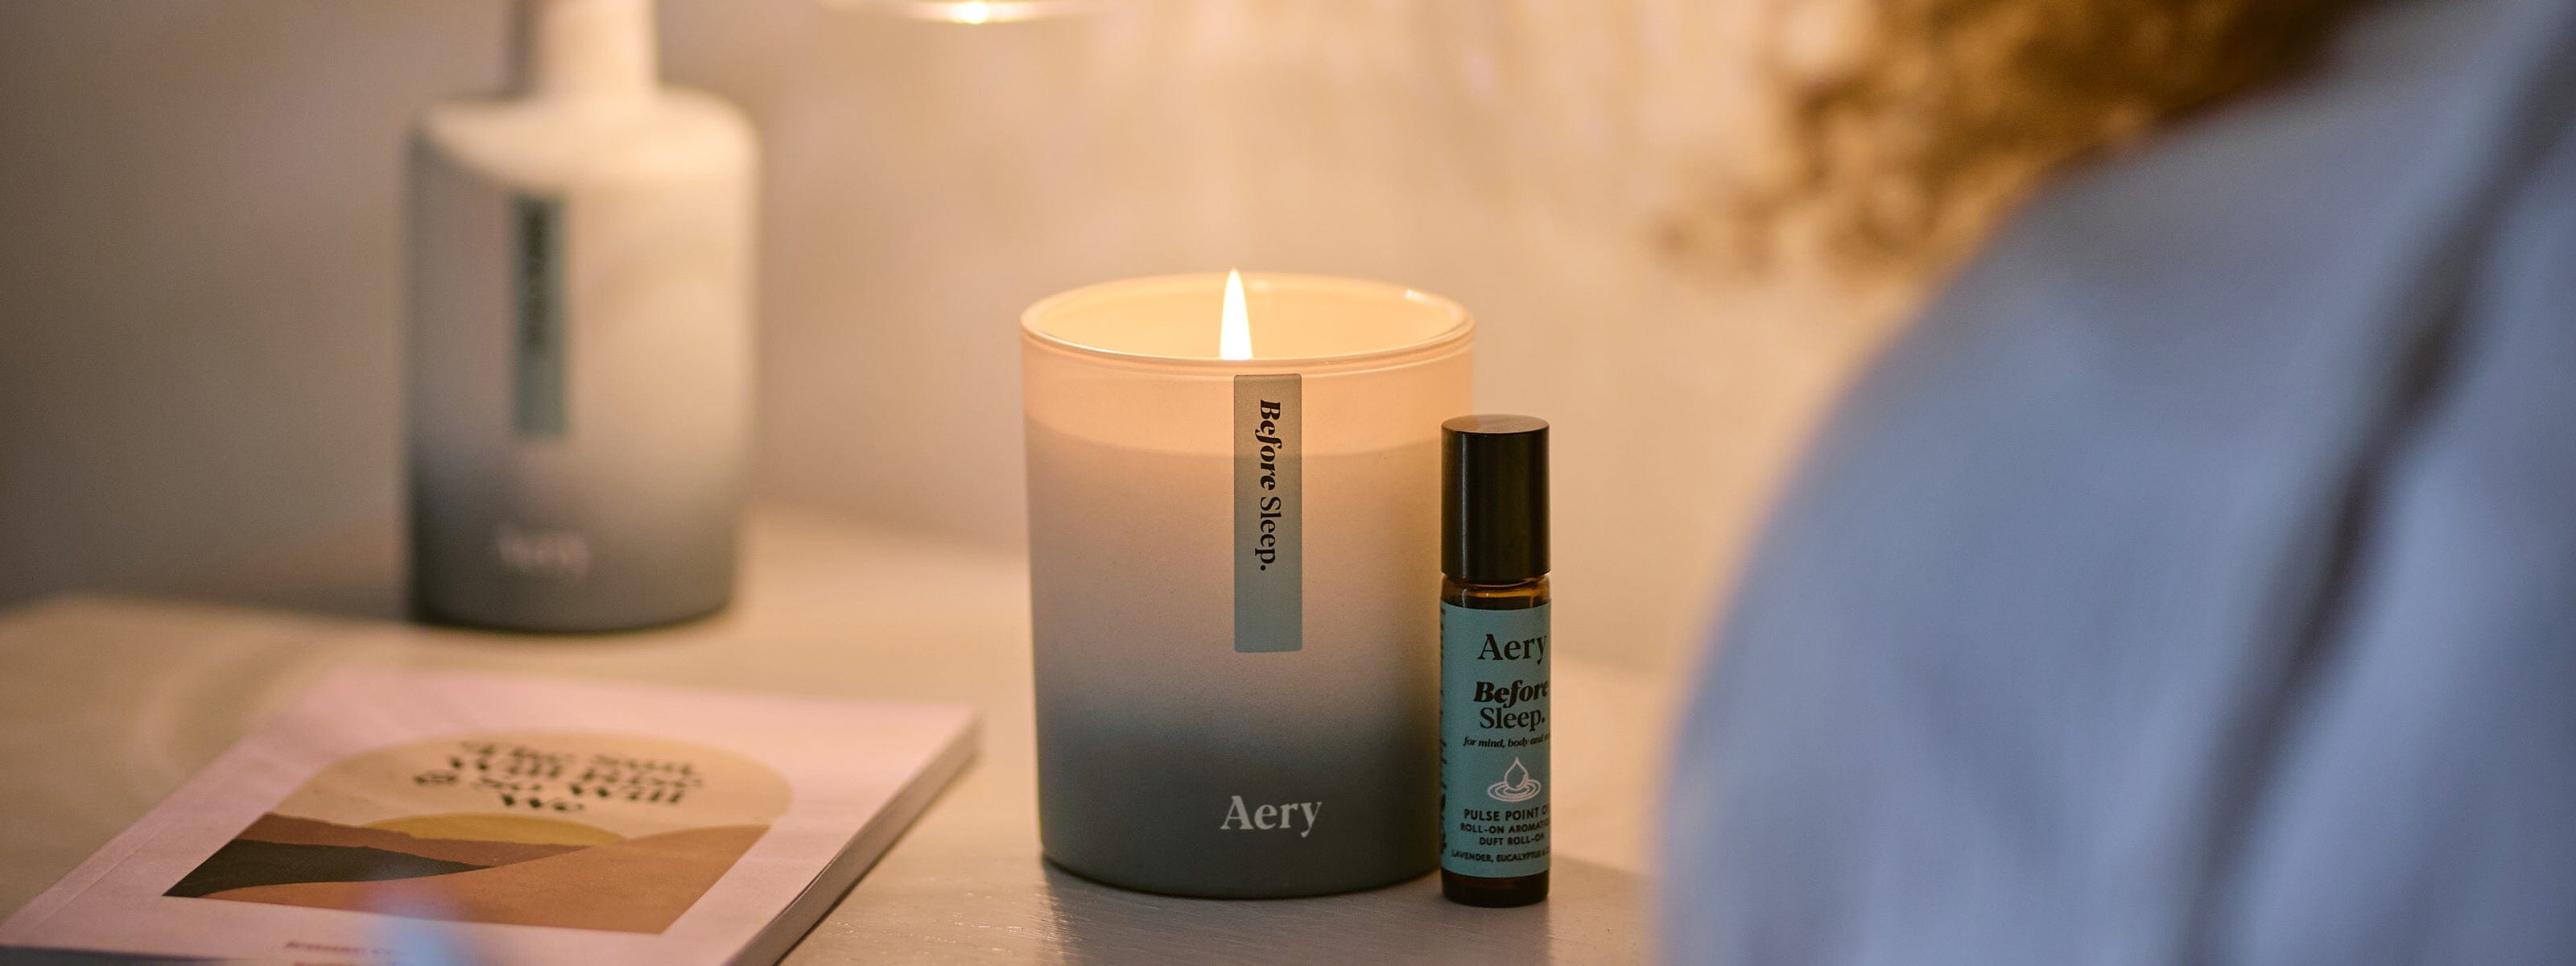 before sleep aery candle displayed next to person reading on a bedside table along with matching diffuser and pulse point roll on